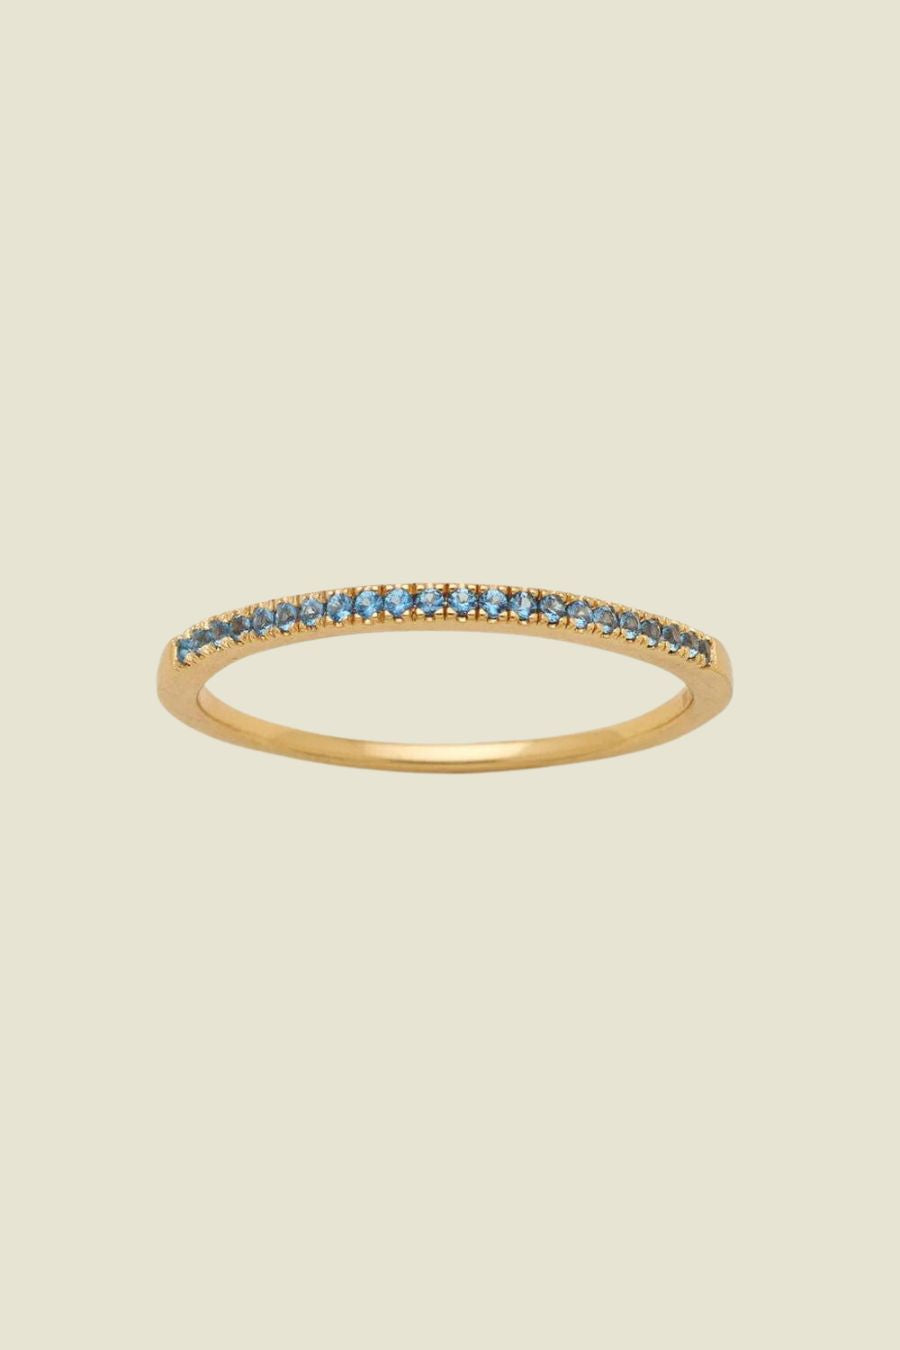 Made by Mary December Birthstone Stacking Ring